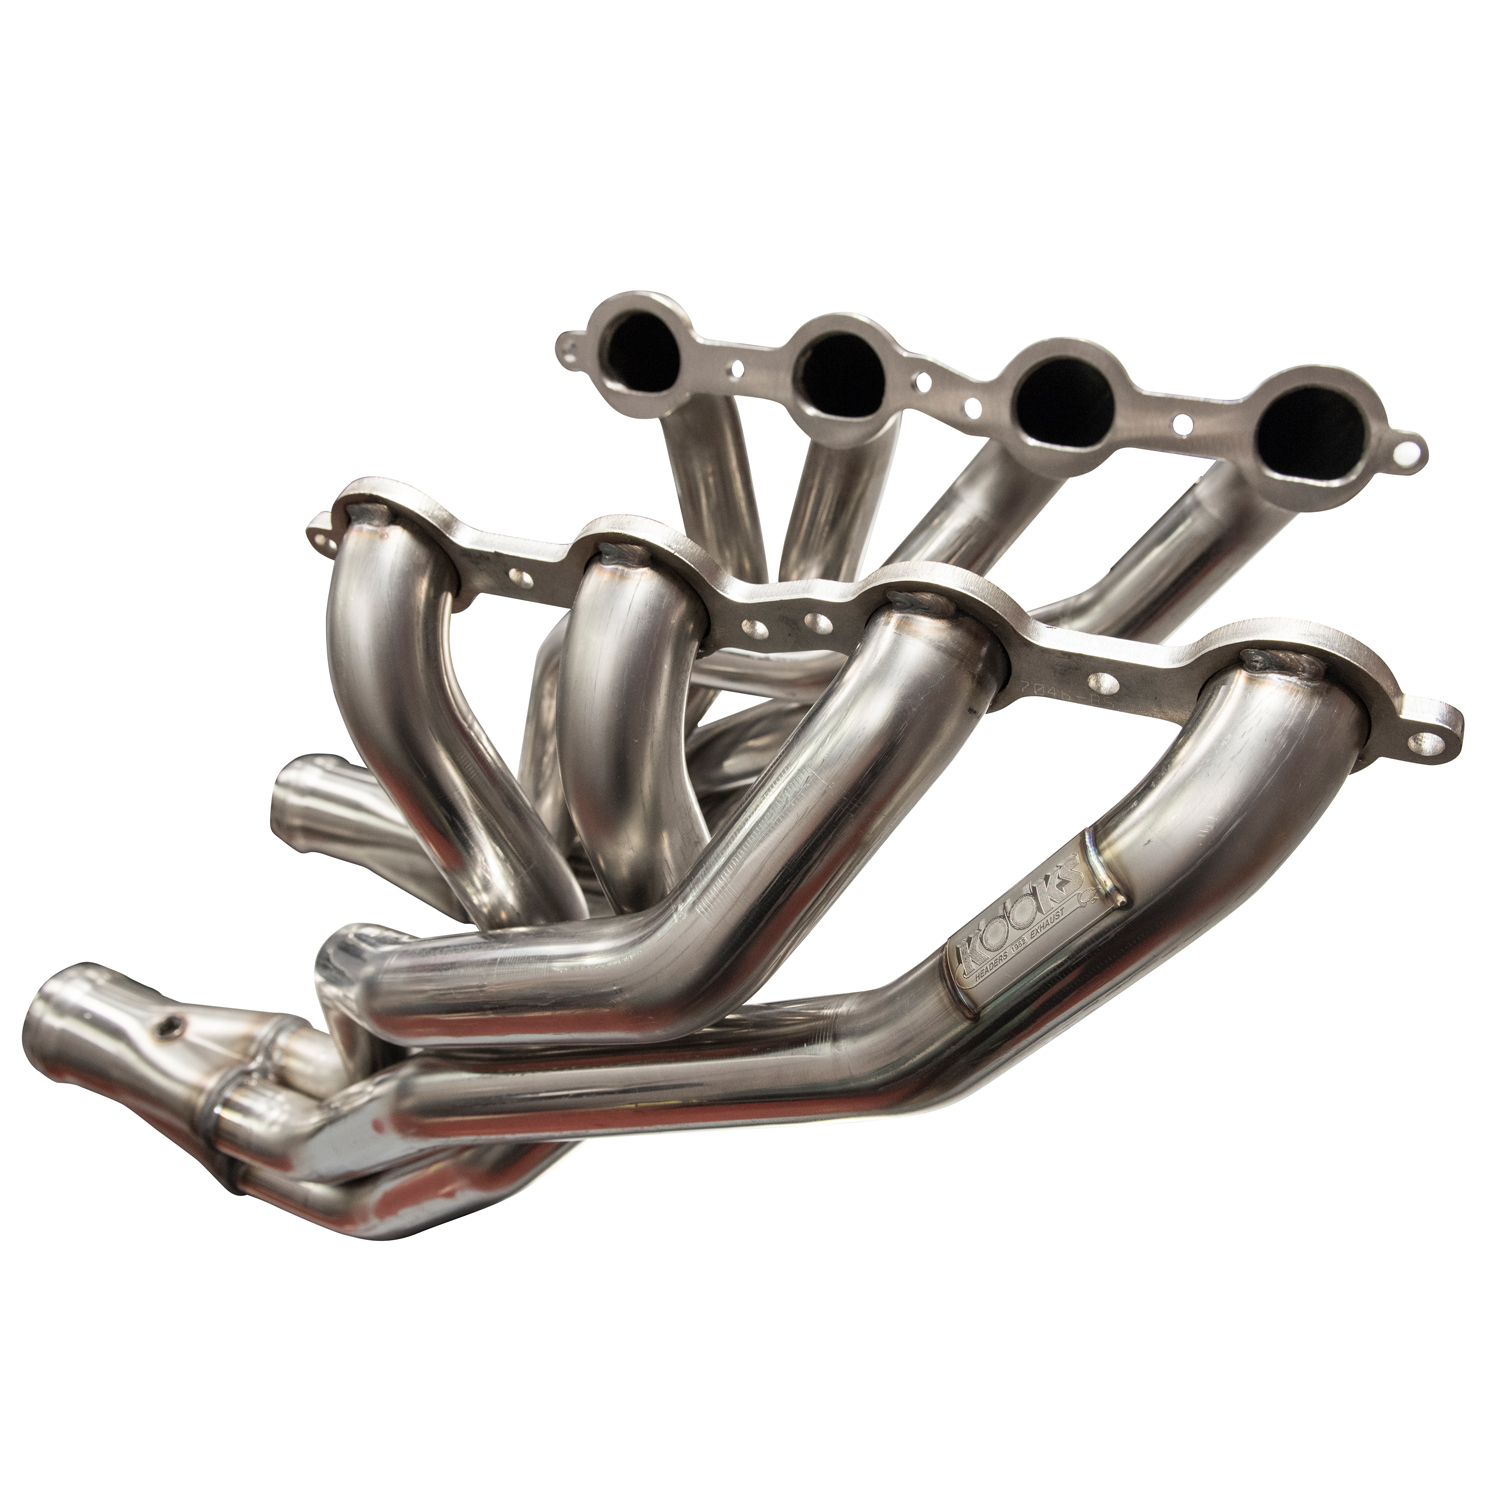 Stainless Steel Headers 1.875 x 3" Long Tube w/Torca Tight Connections And O2 Extensions